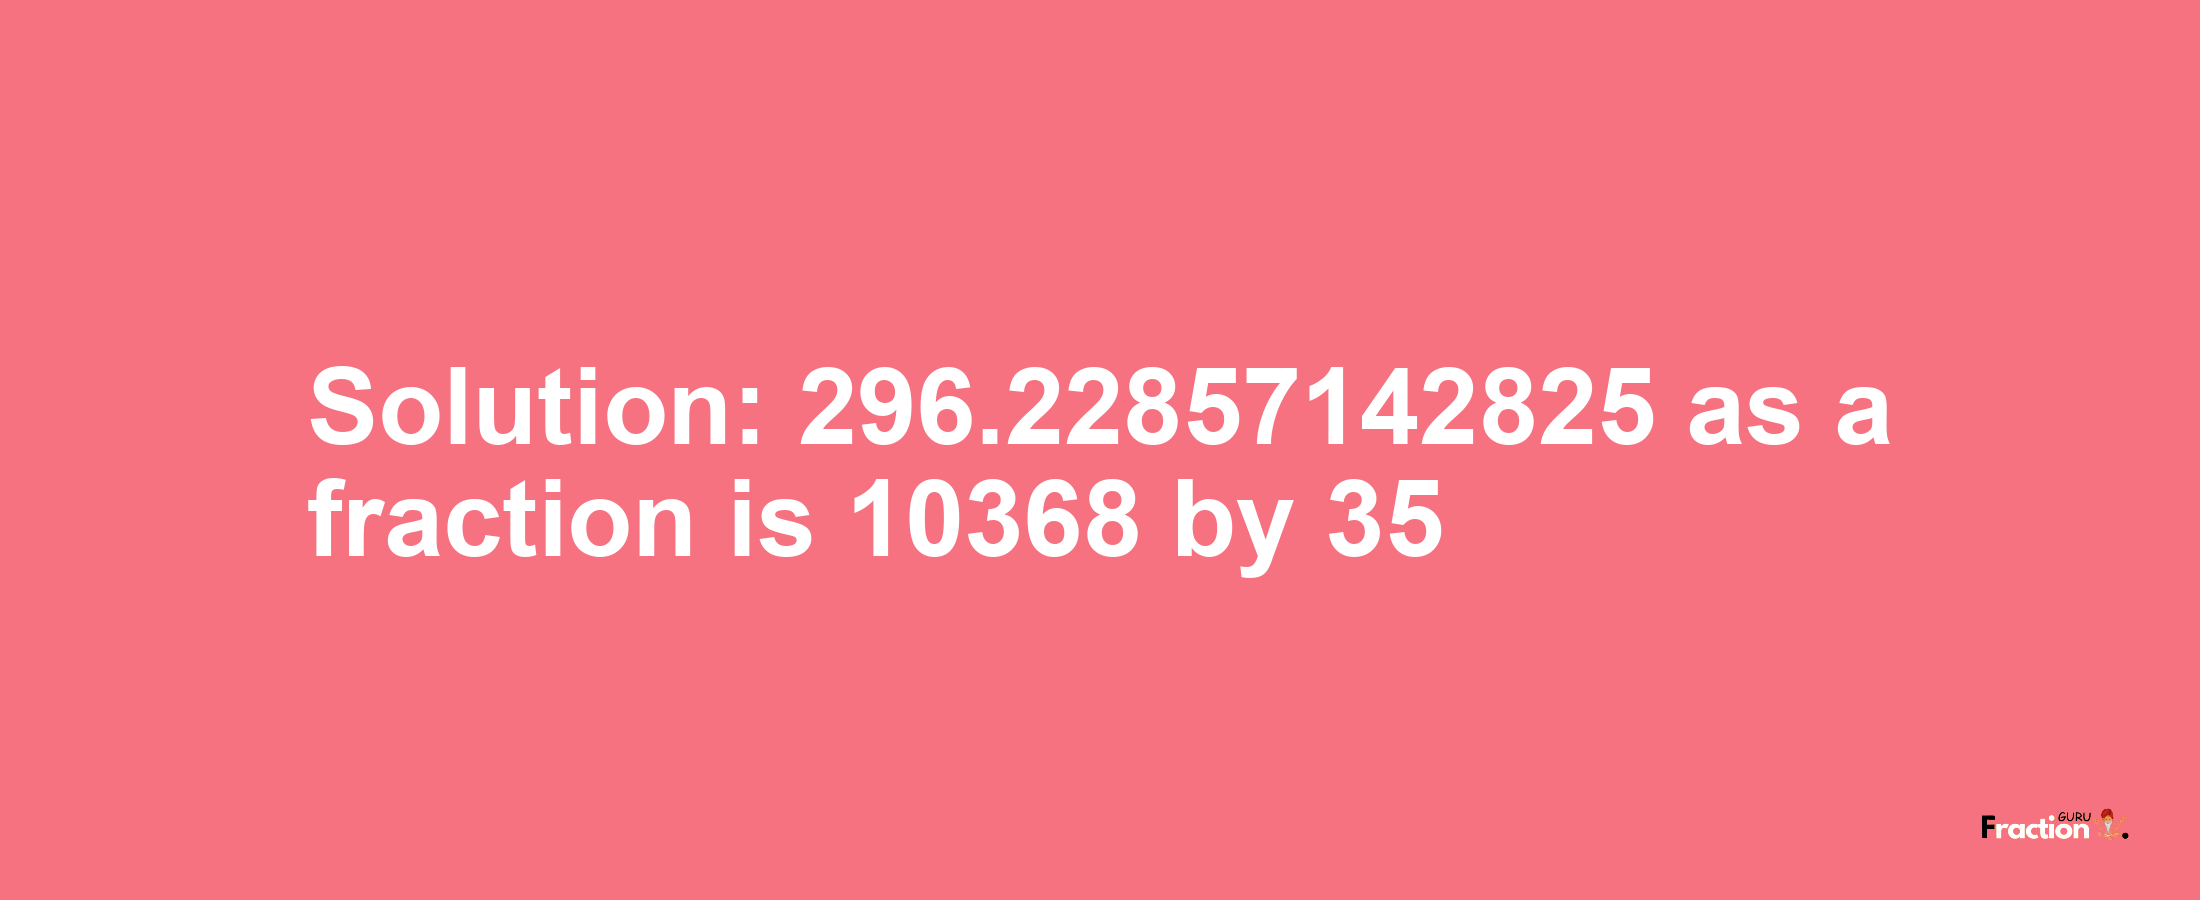 Solution:296.22857142825 as a fraction is 10368/35